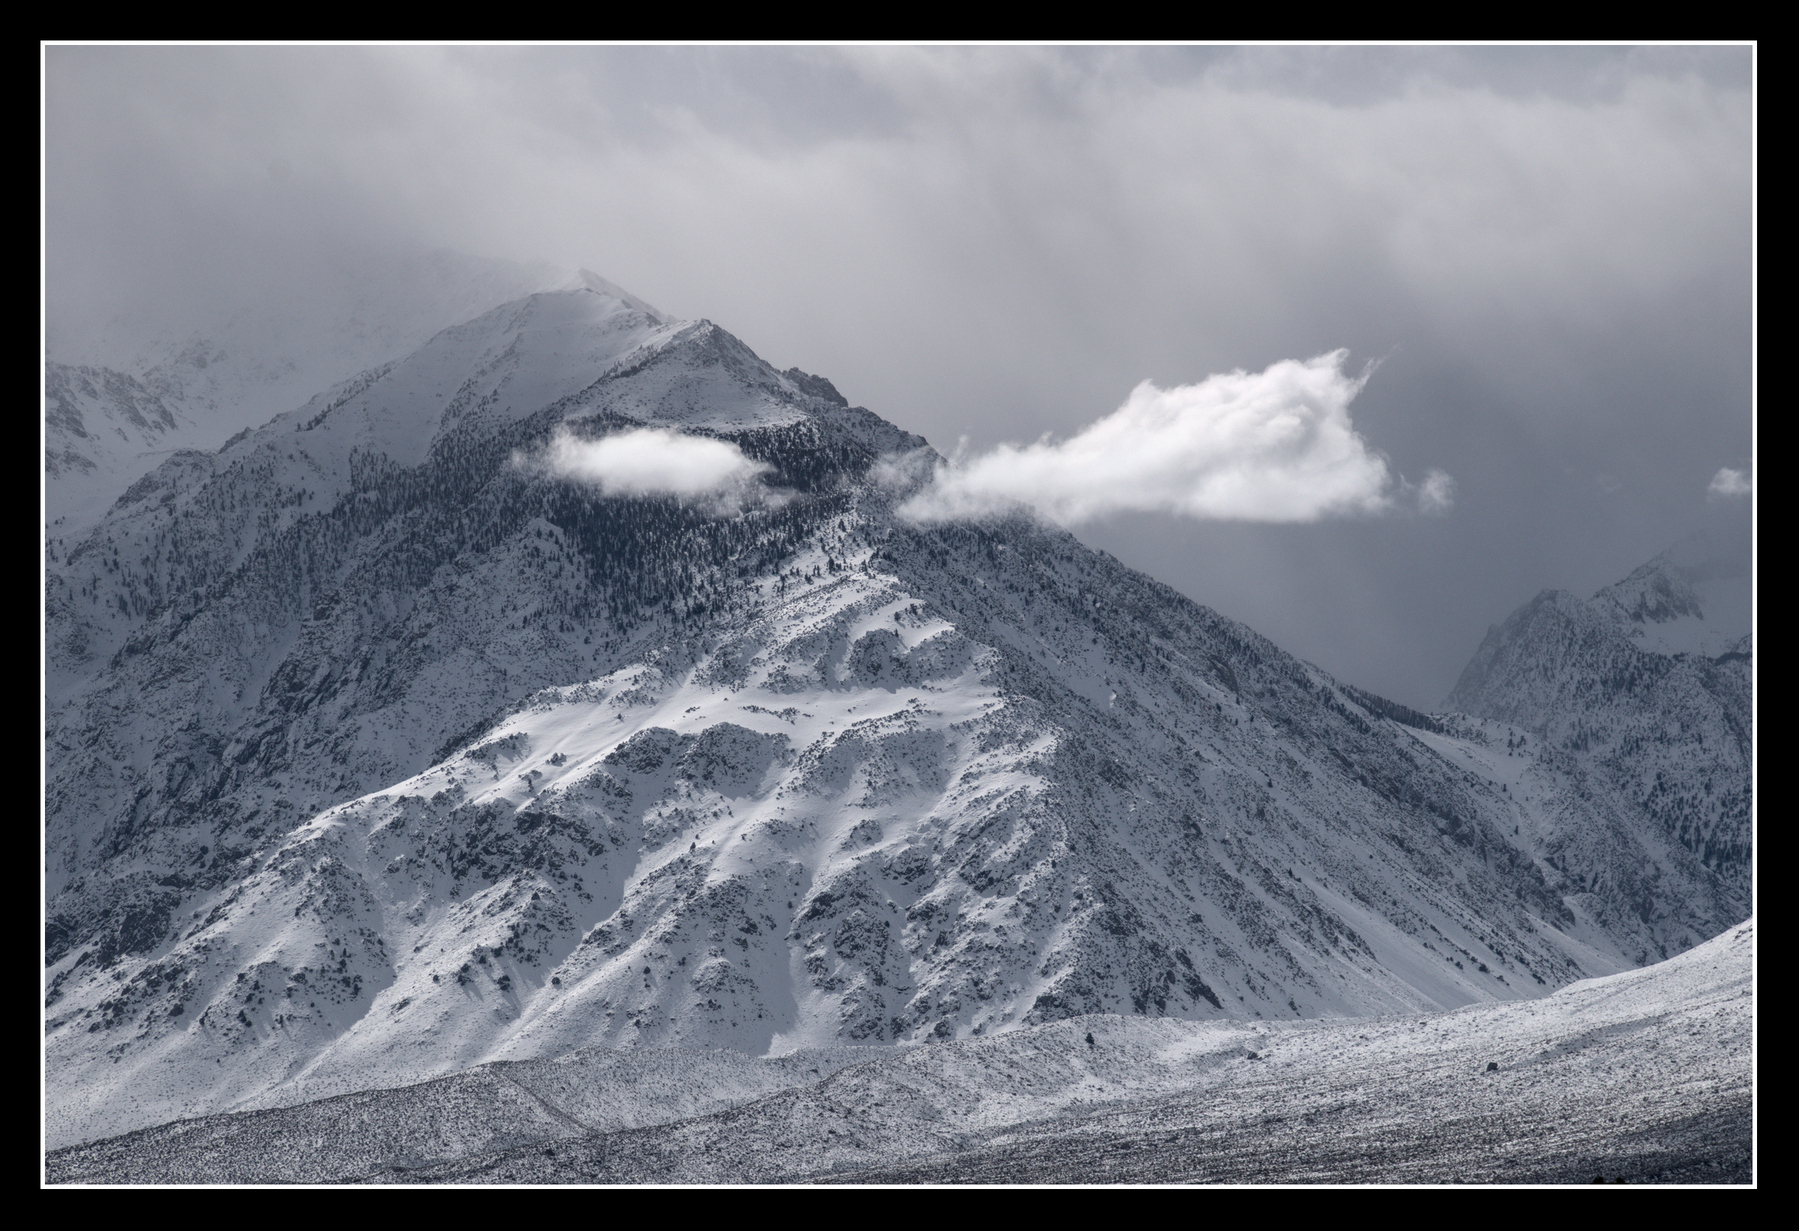 A snow-covered mountain has a sharp ridge line running from summit to ground. Two small clouds on either side of the ridge line make it look like a face, with the clouds as eyebrows.